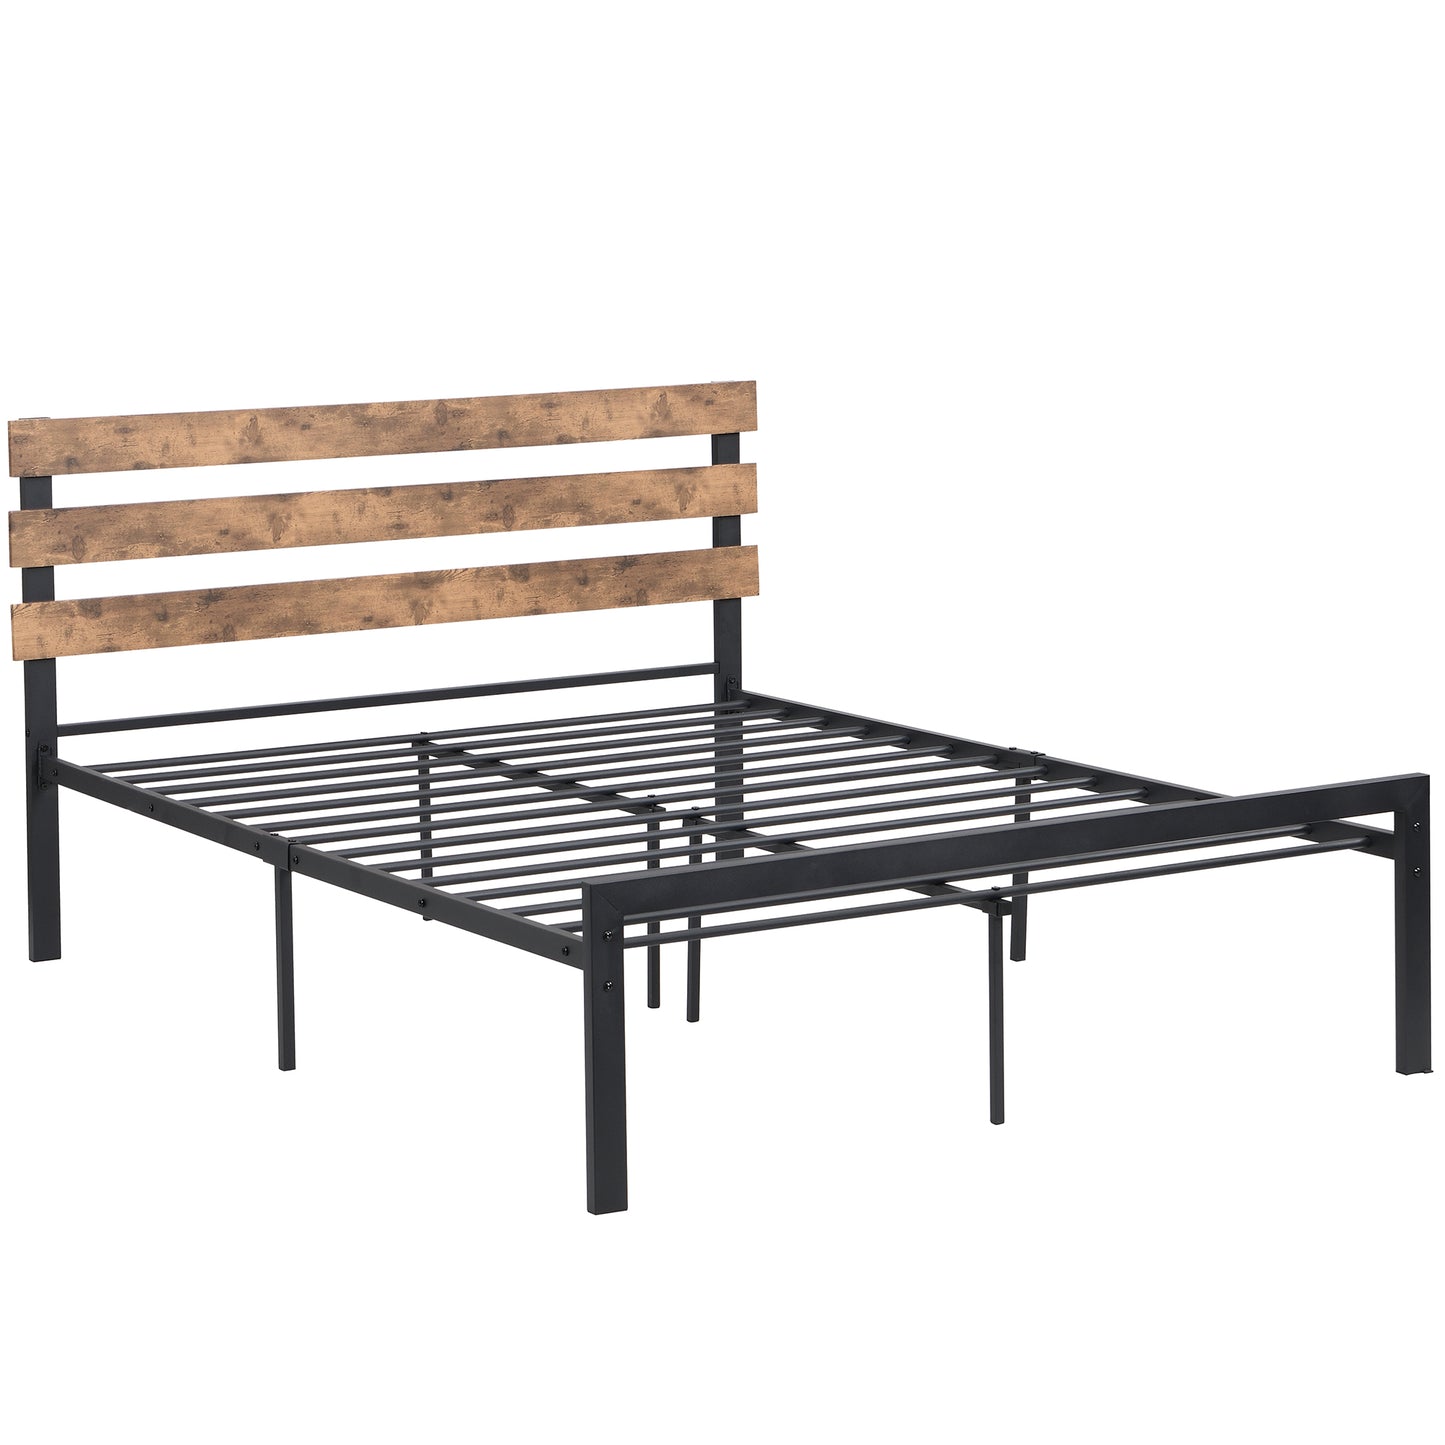 SYNGAR Black Metal Platform Bed Frame Full Size with Wooden Headboard, Steel Legs, Underbed Storage, Strong Slat Support, No Box Spring Needed, Rustic Full Bed Frame for Kids Teens Adults